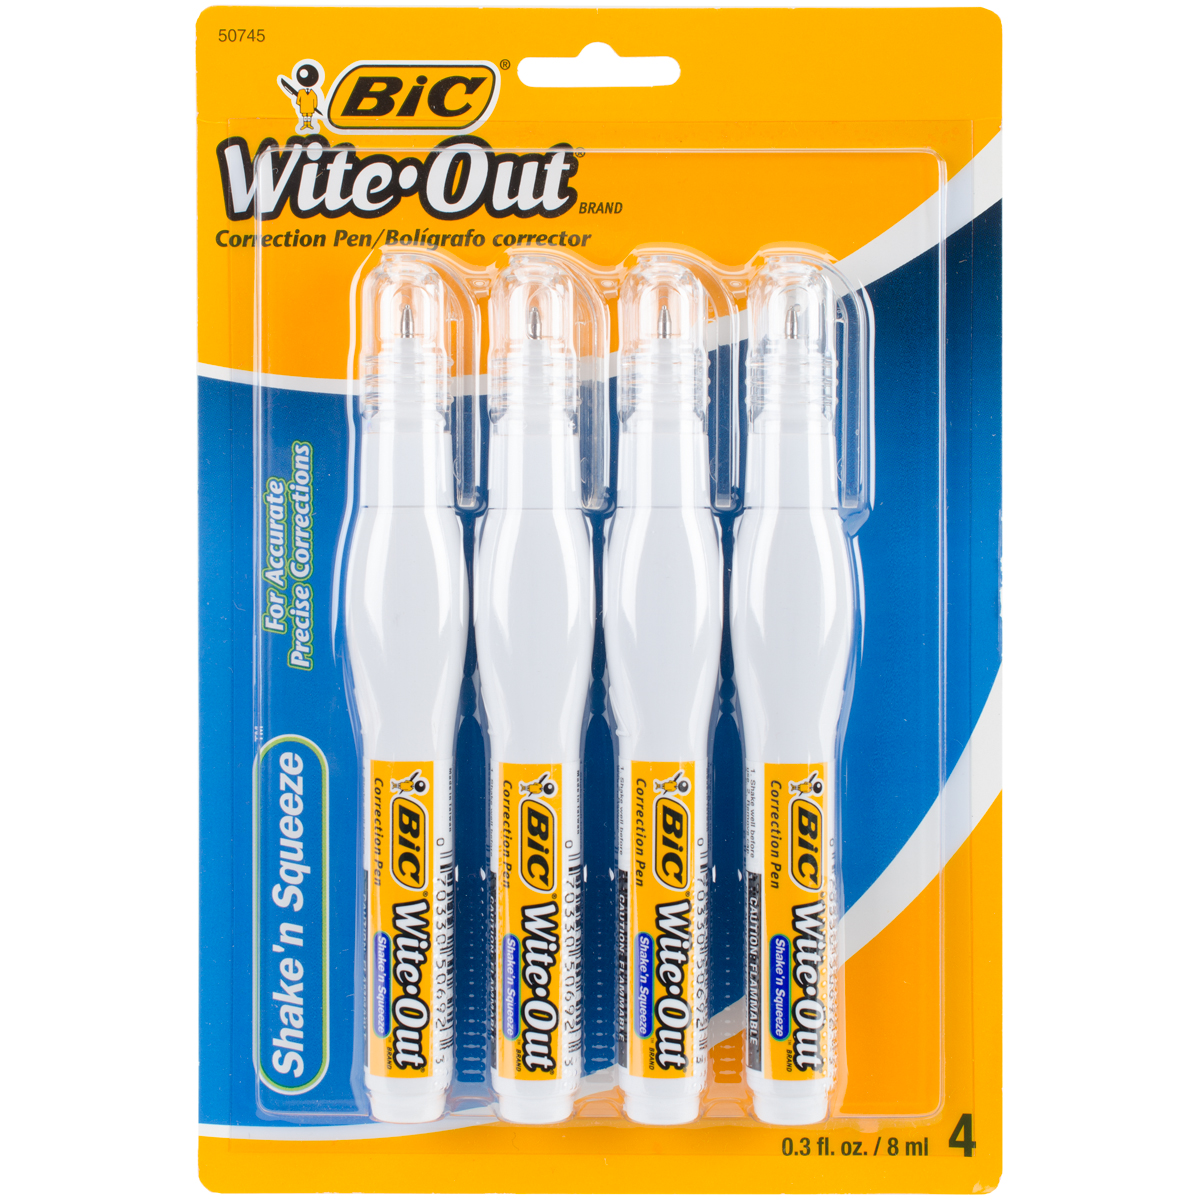 sniff white out pen